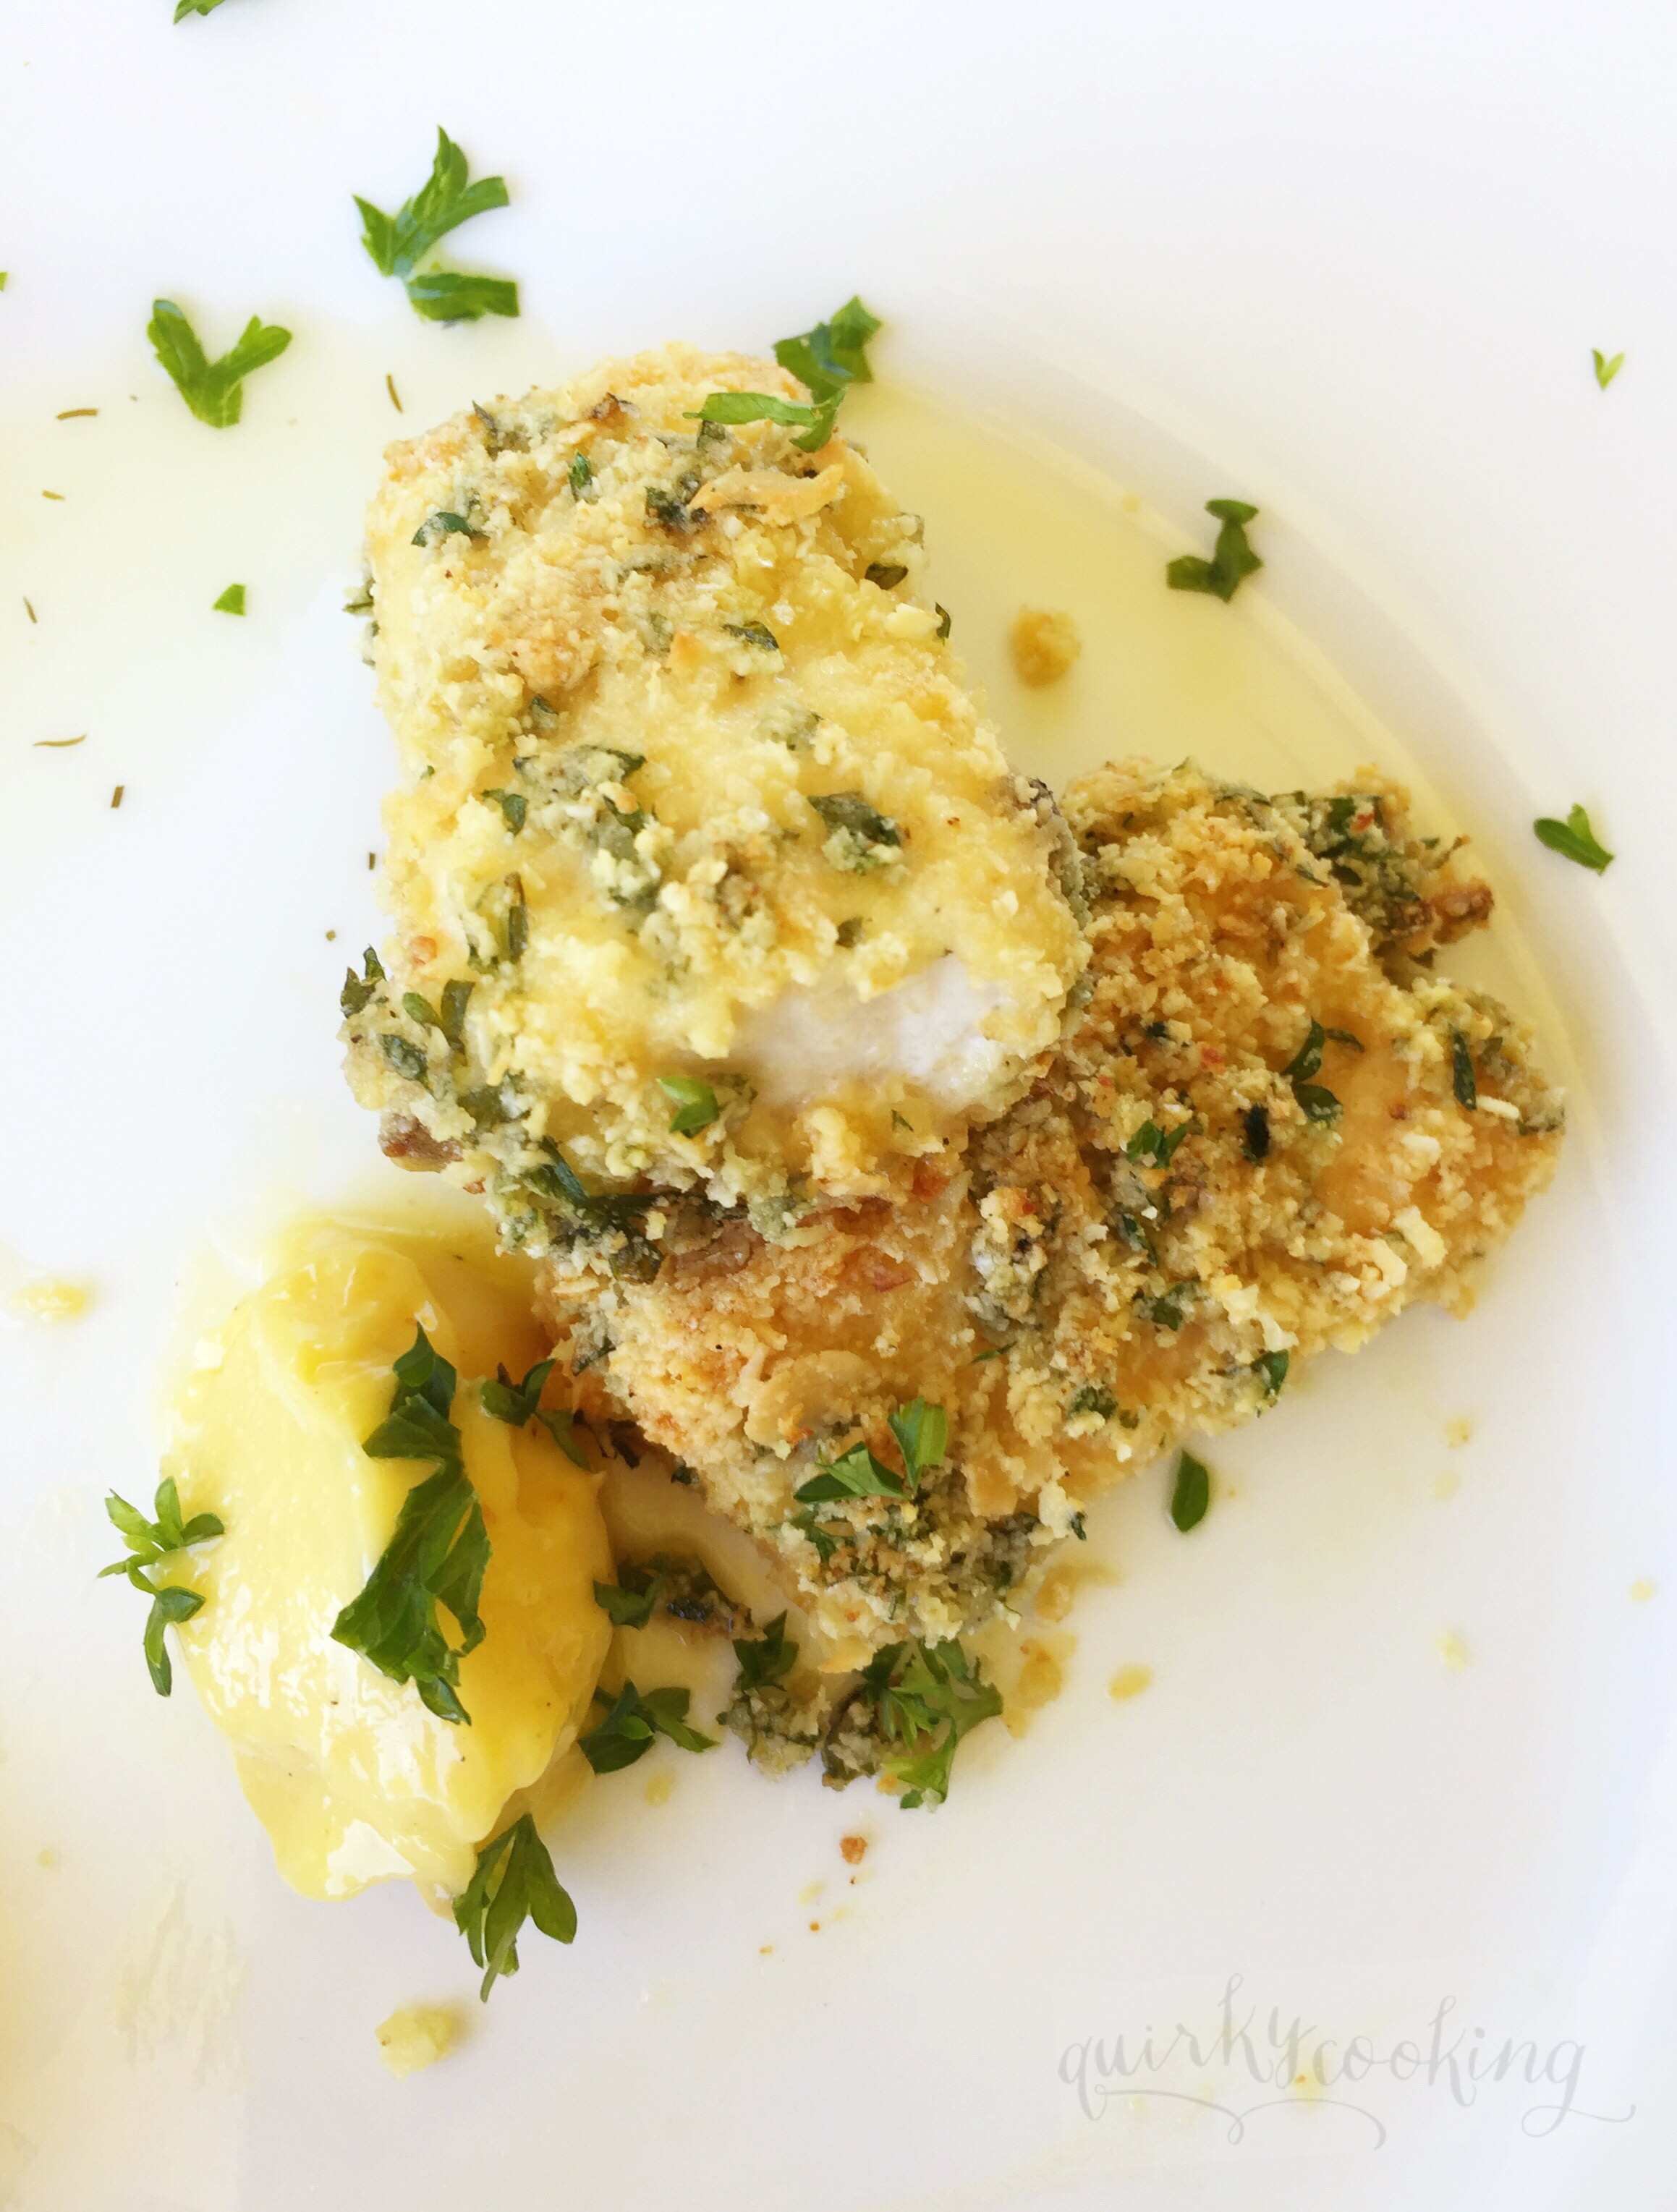 Baked Fish Fingers (Grain Free), Quirky Cooking